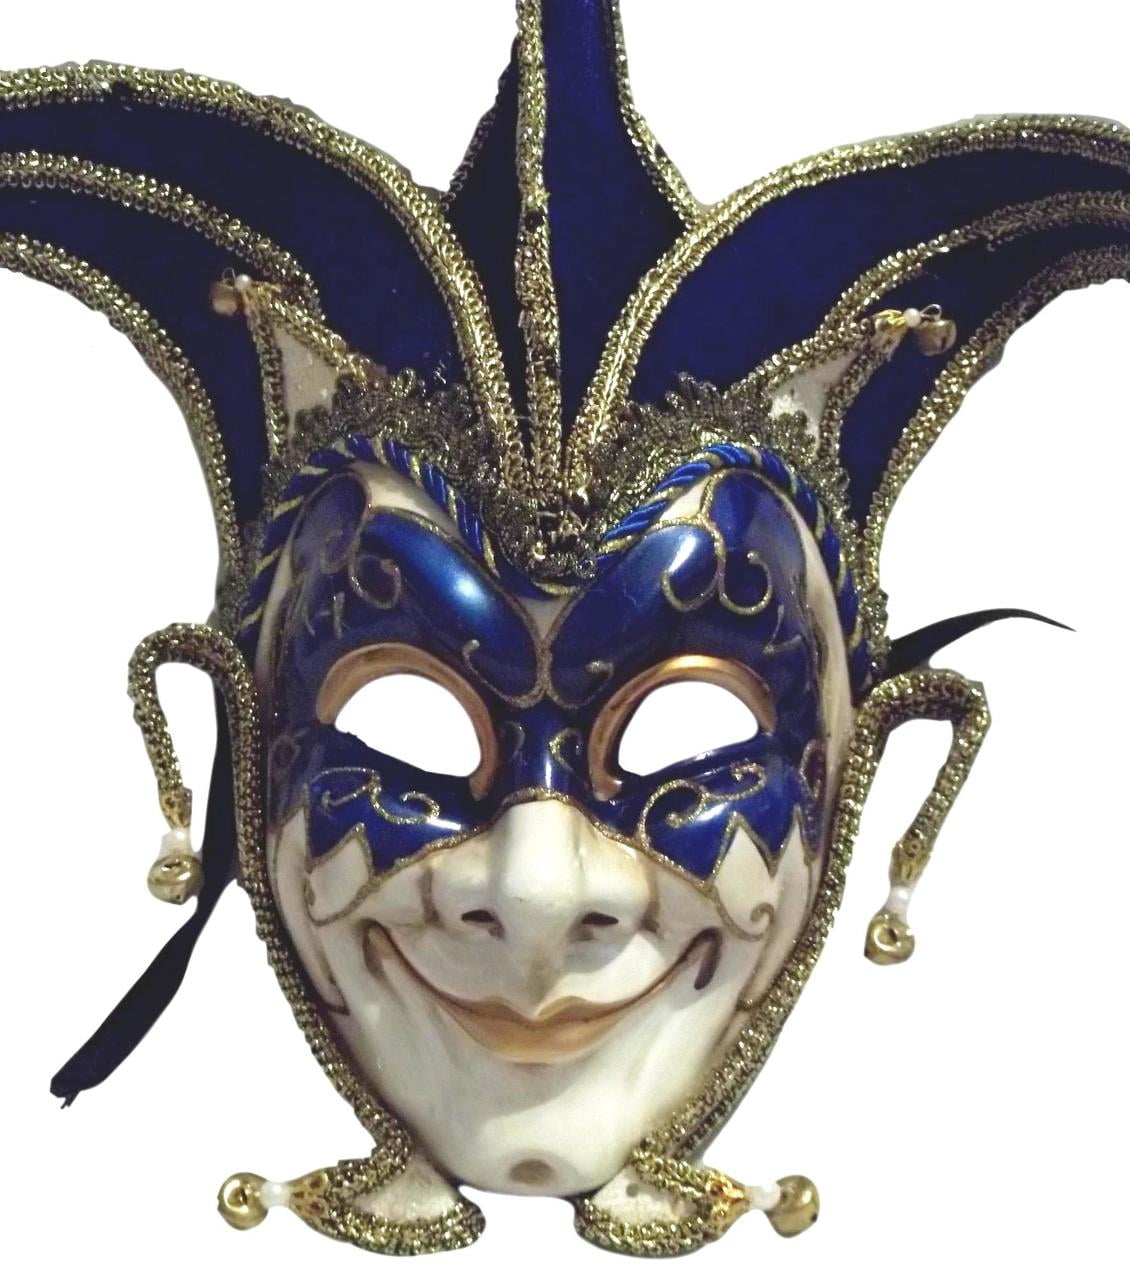 Le mal adulte Full Face Jester Masquerade Masque Halloween Déguisements accessoryem372 